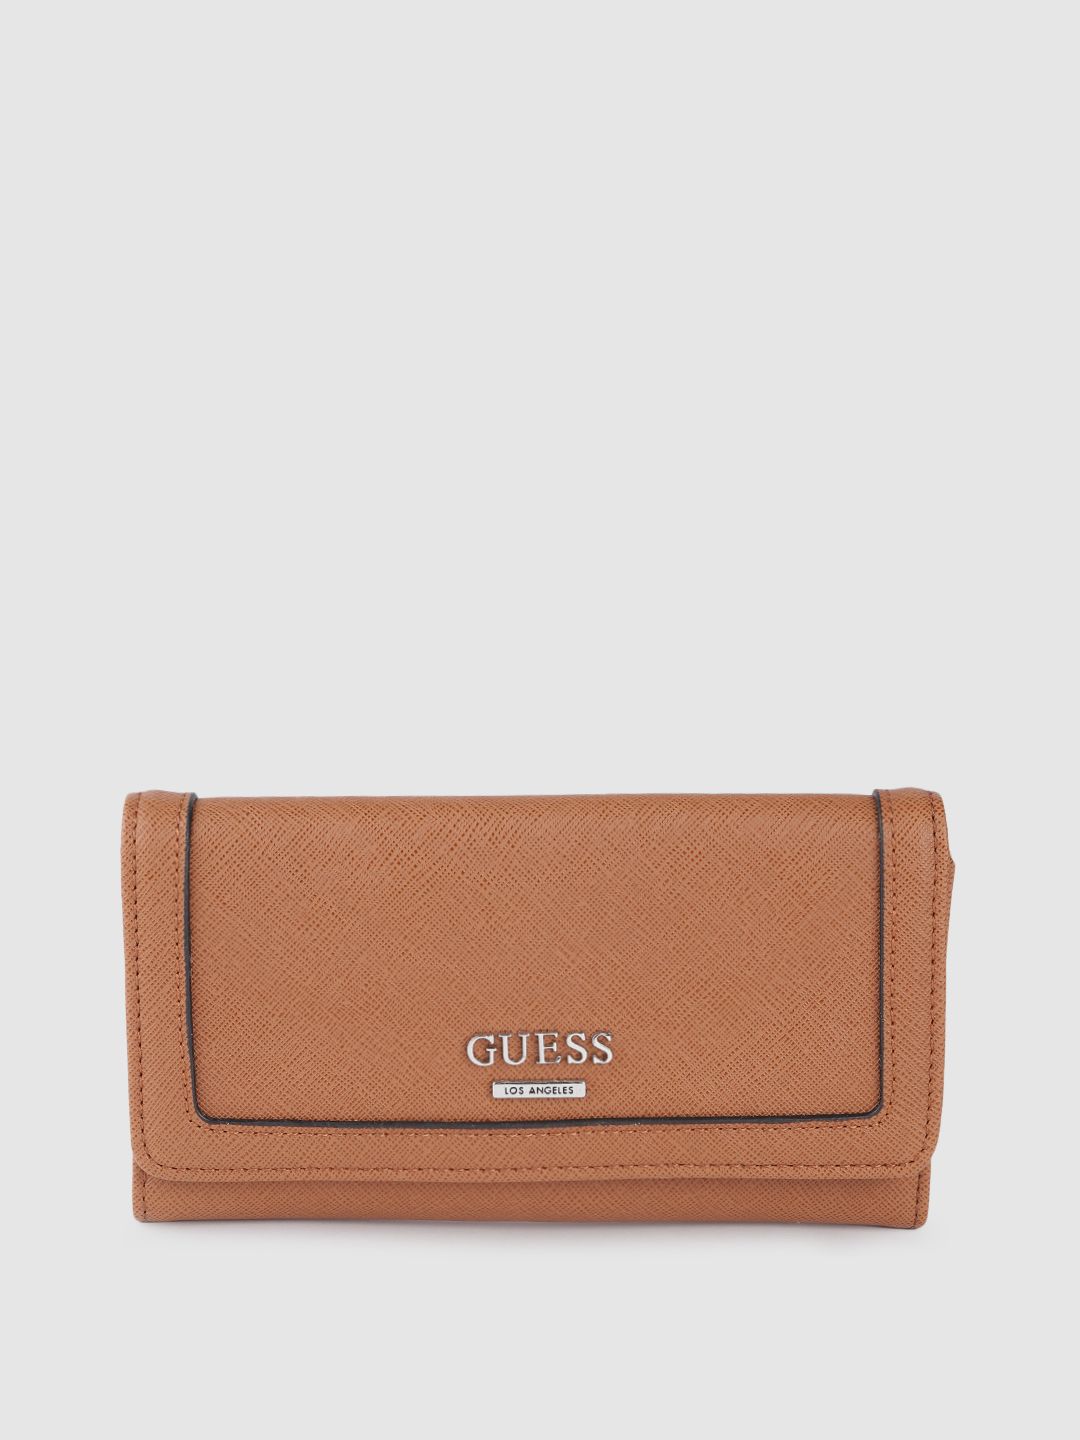 GUESS Women Tan Brown Saffiano Textured Three Fold Wallet Price in India